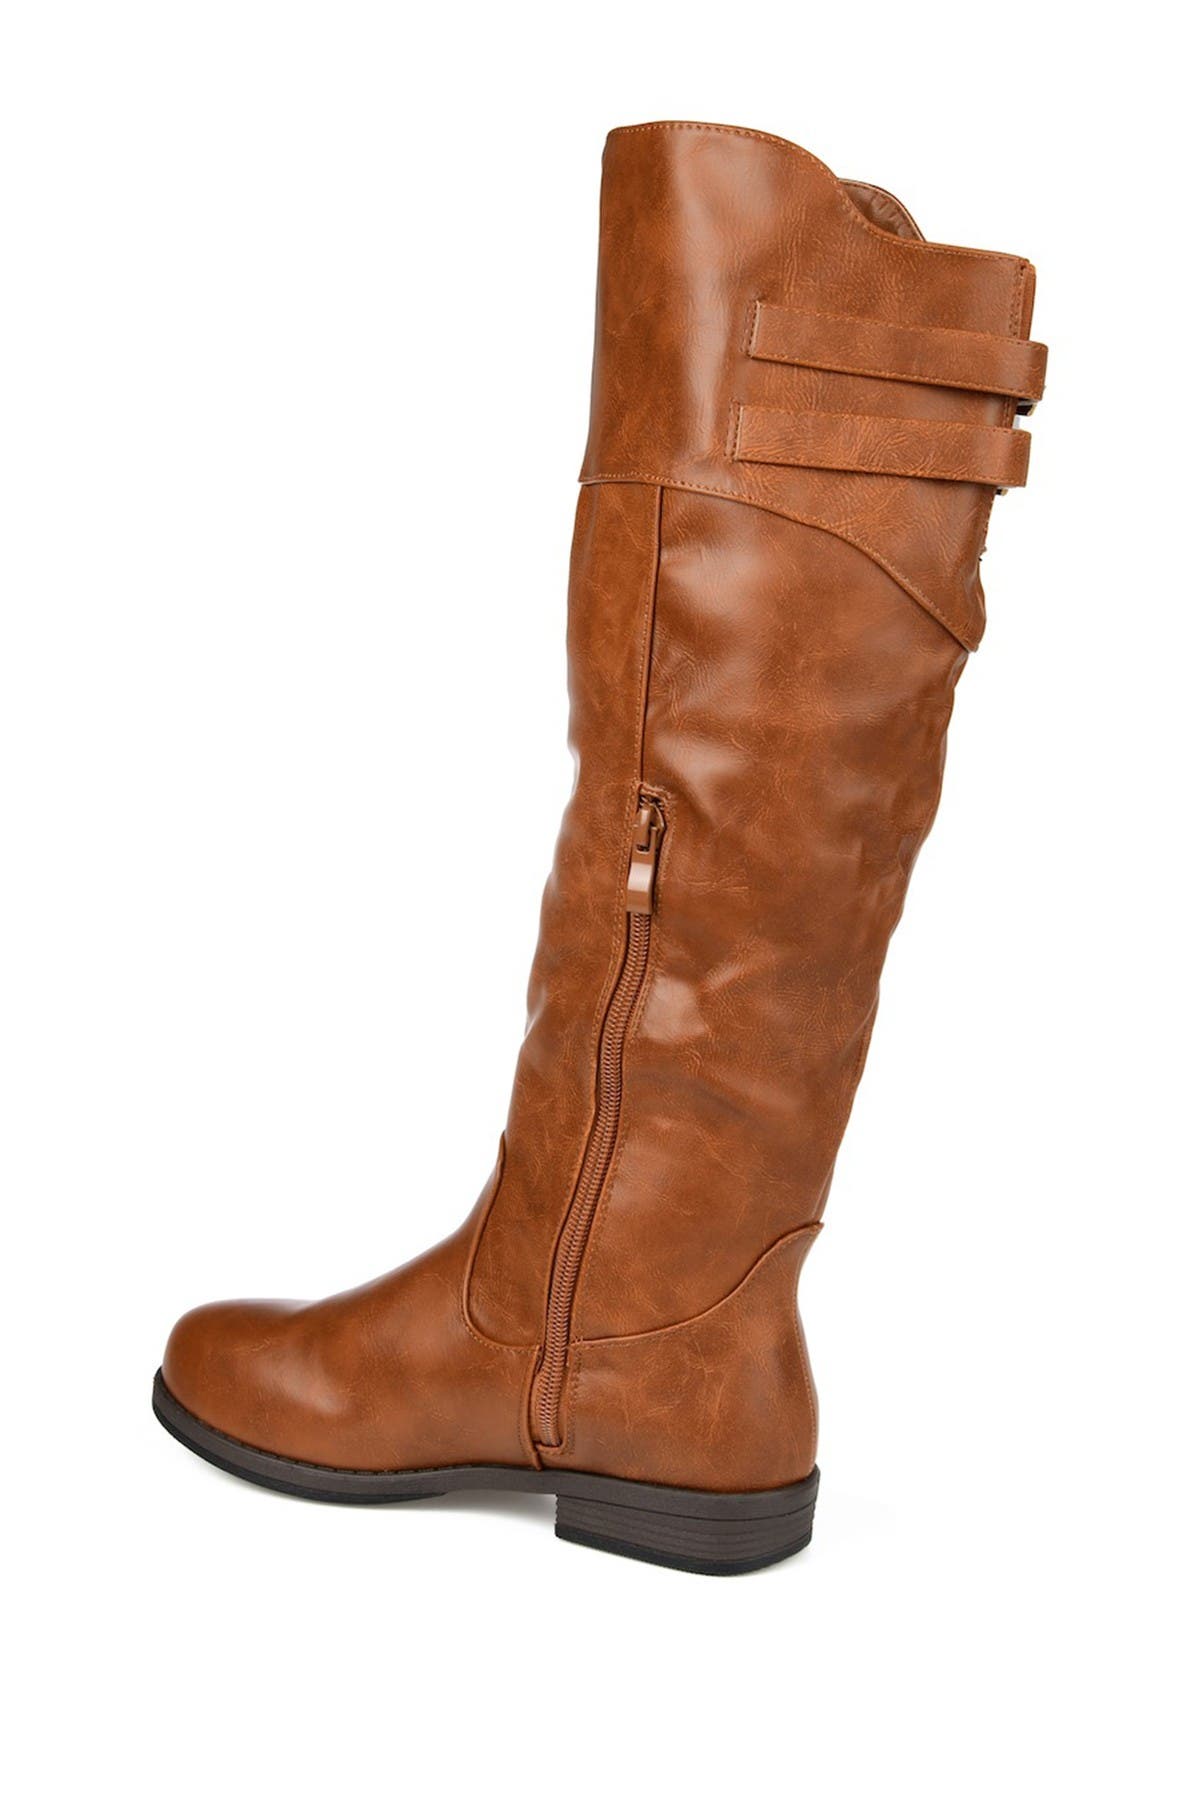 Journee Collection Tori Riding Boot In Light/pastel Brown6